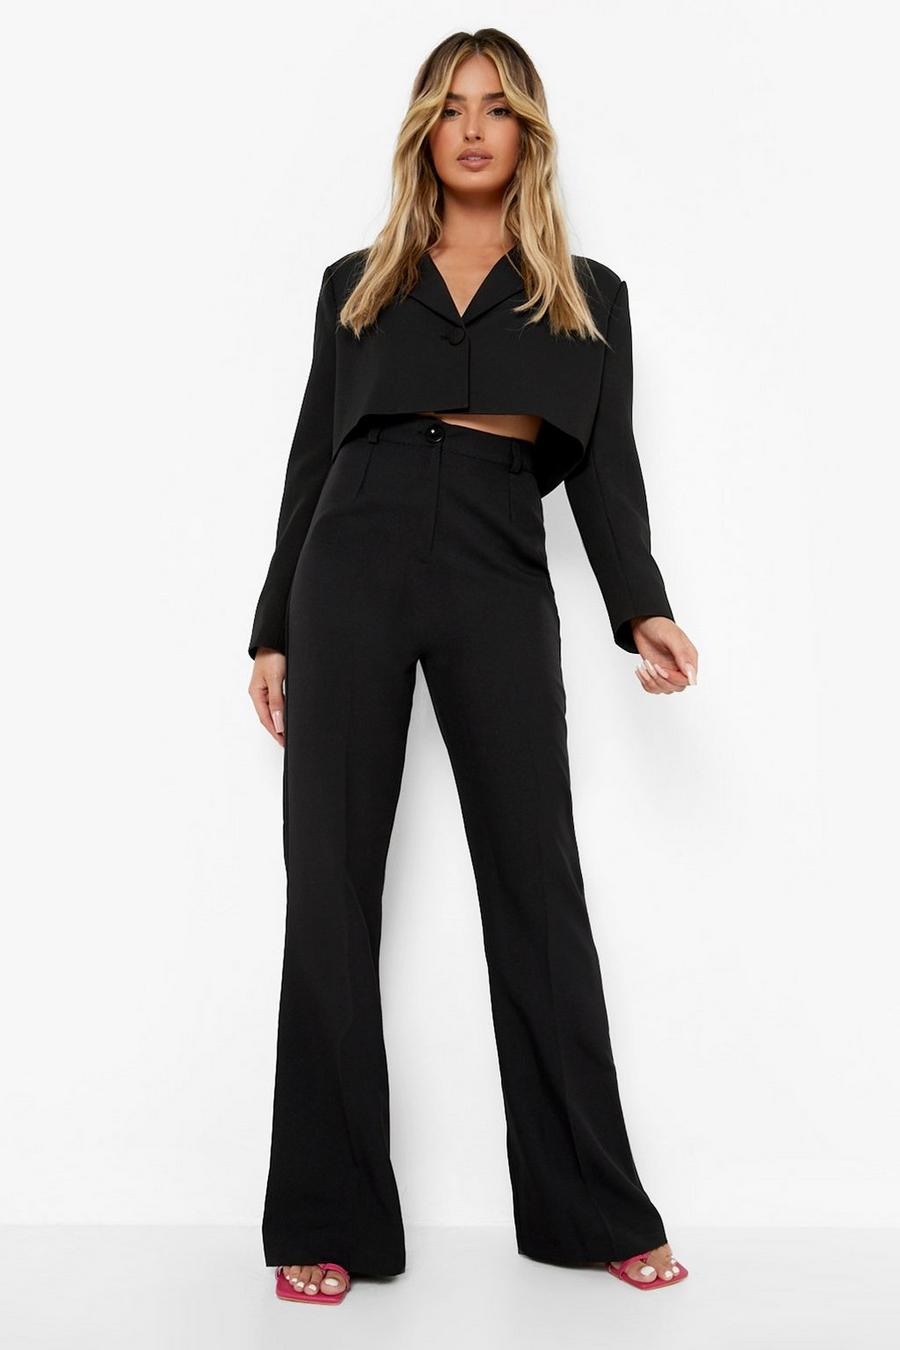 Black Pleat Front Tailored Flared Pants